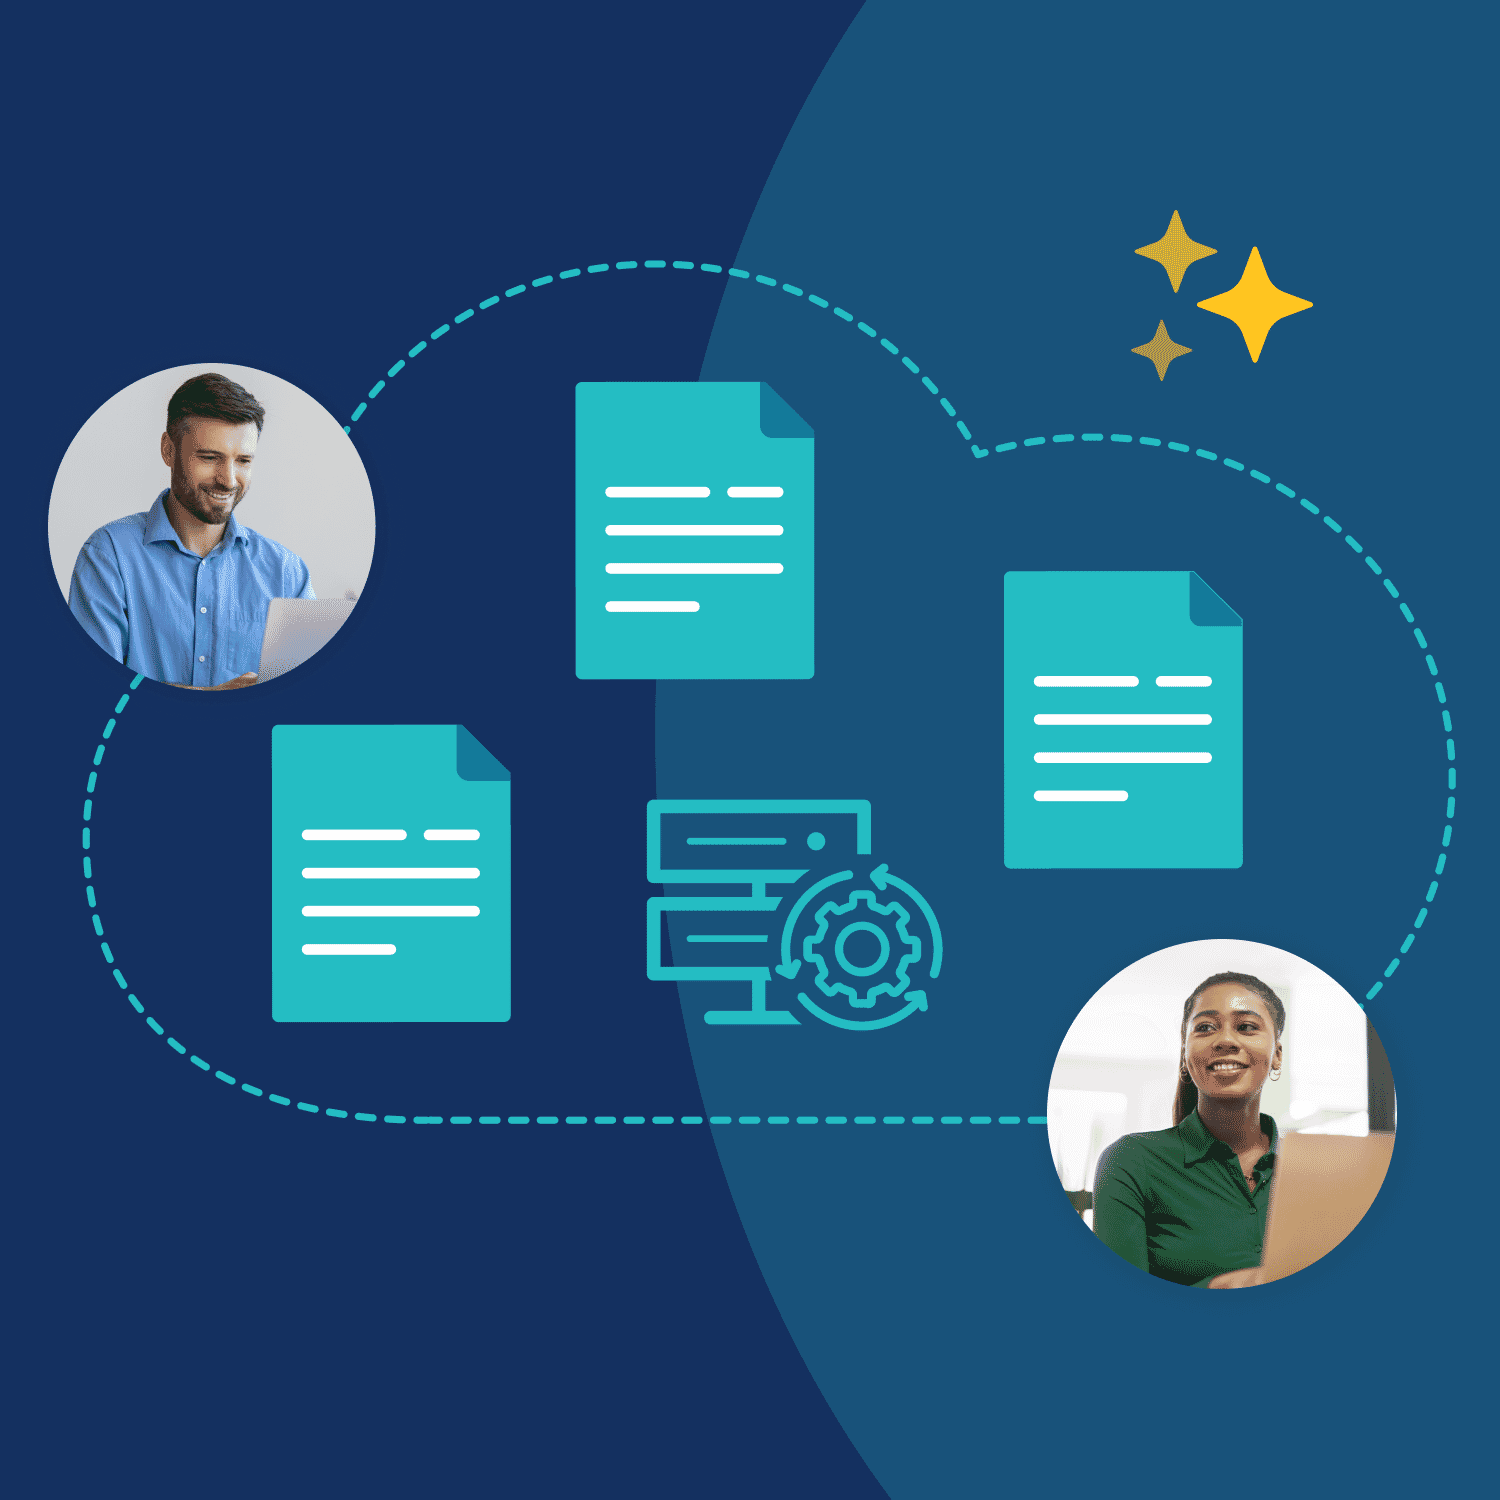 illustration of 3 documents in a cloud with users faces near them